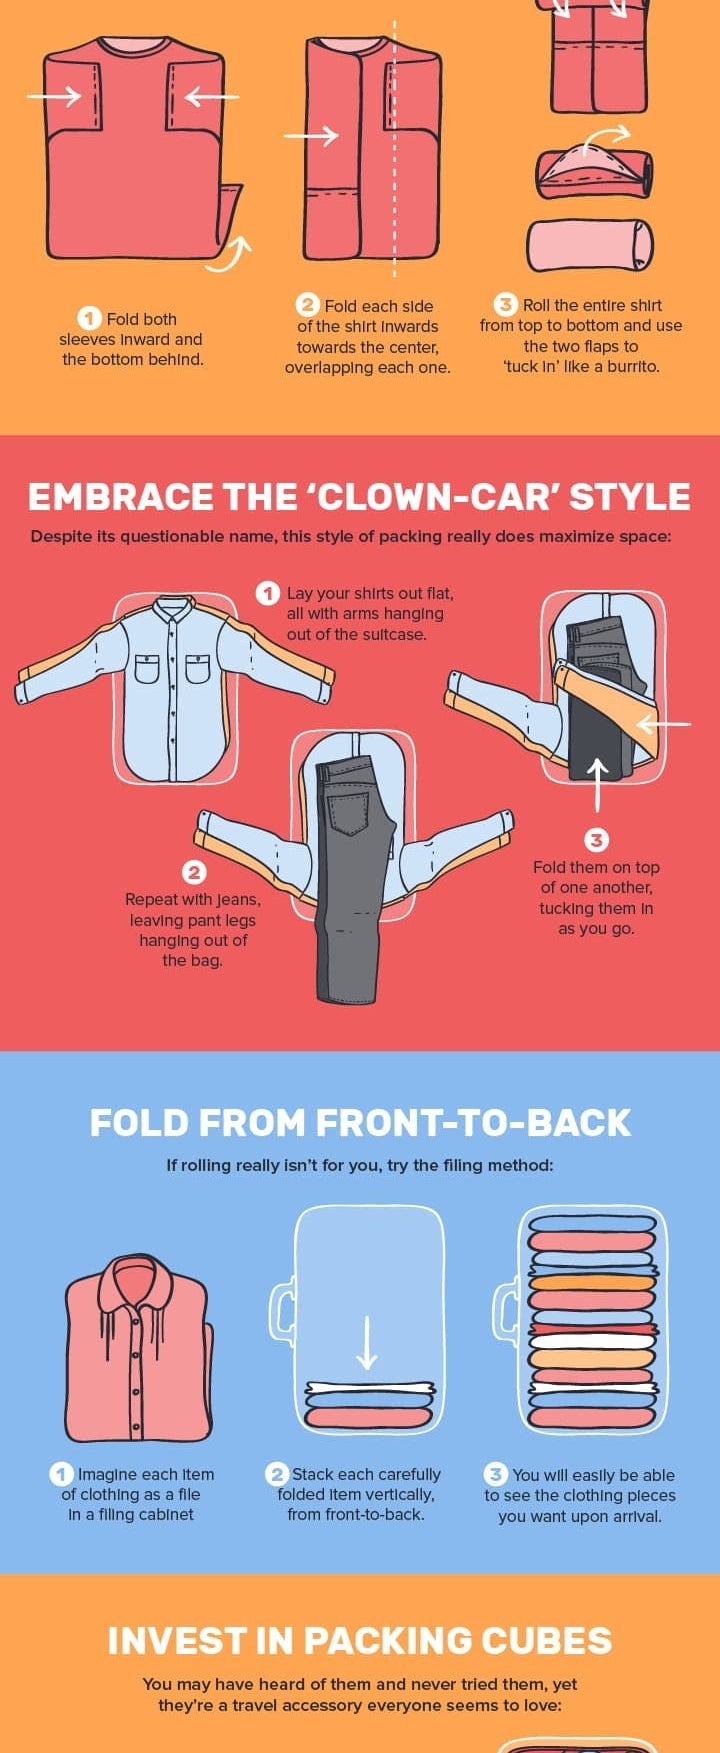 Should Your Roll or Fold Your Clothes for Travel?